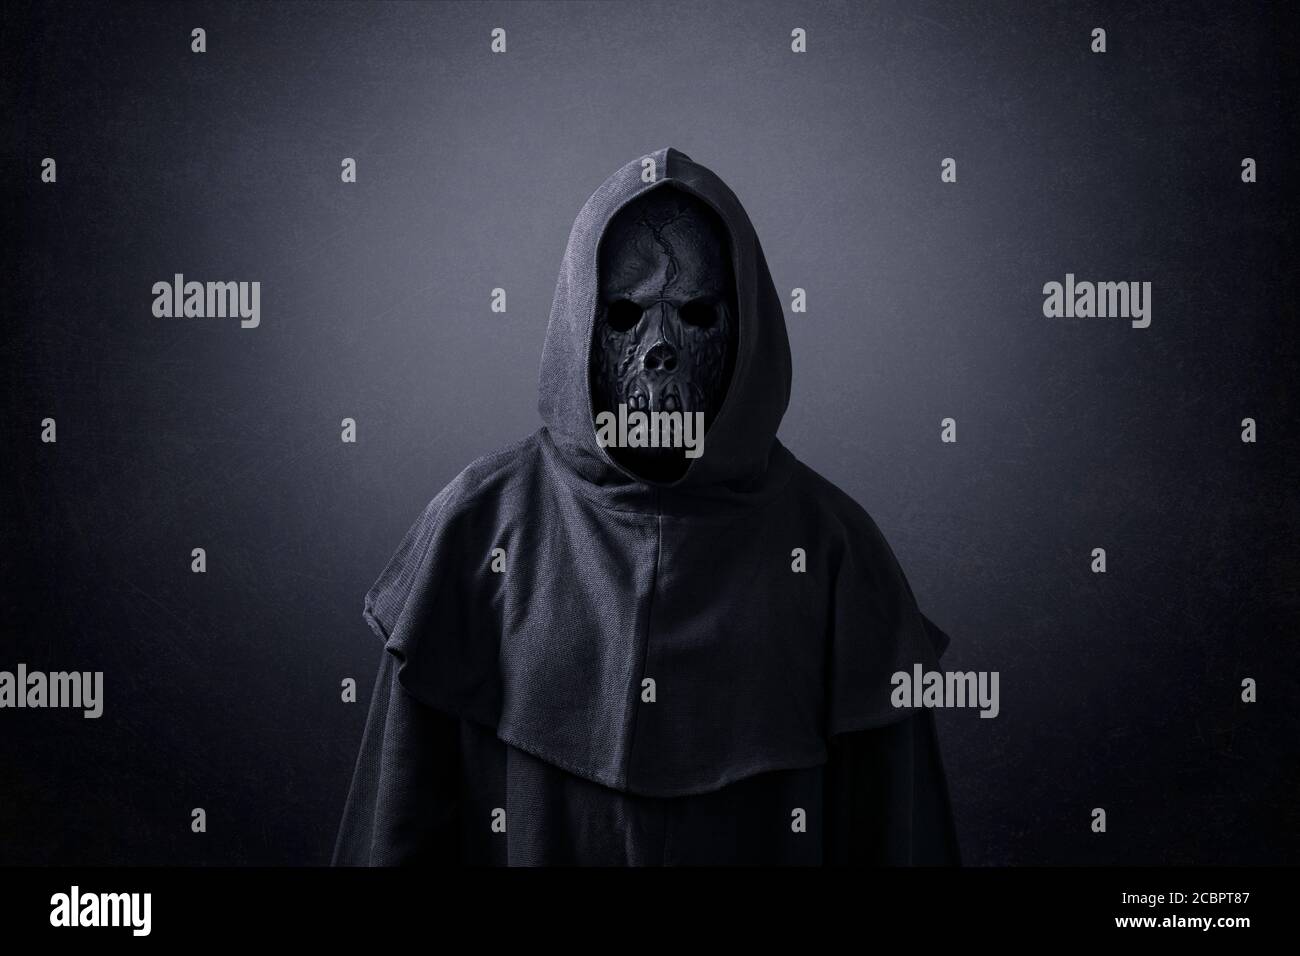 Scary figure in hooded cloak in the dark Stock Photo